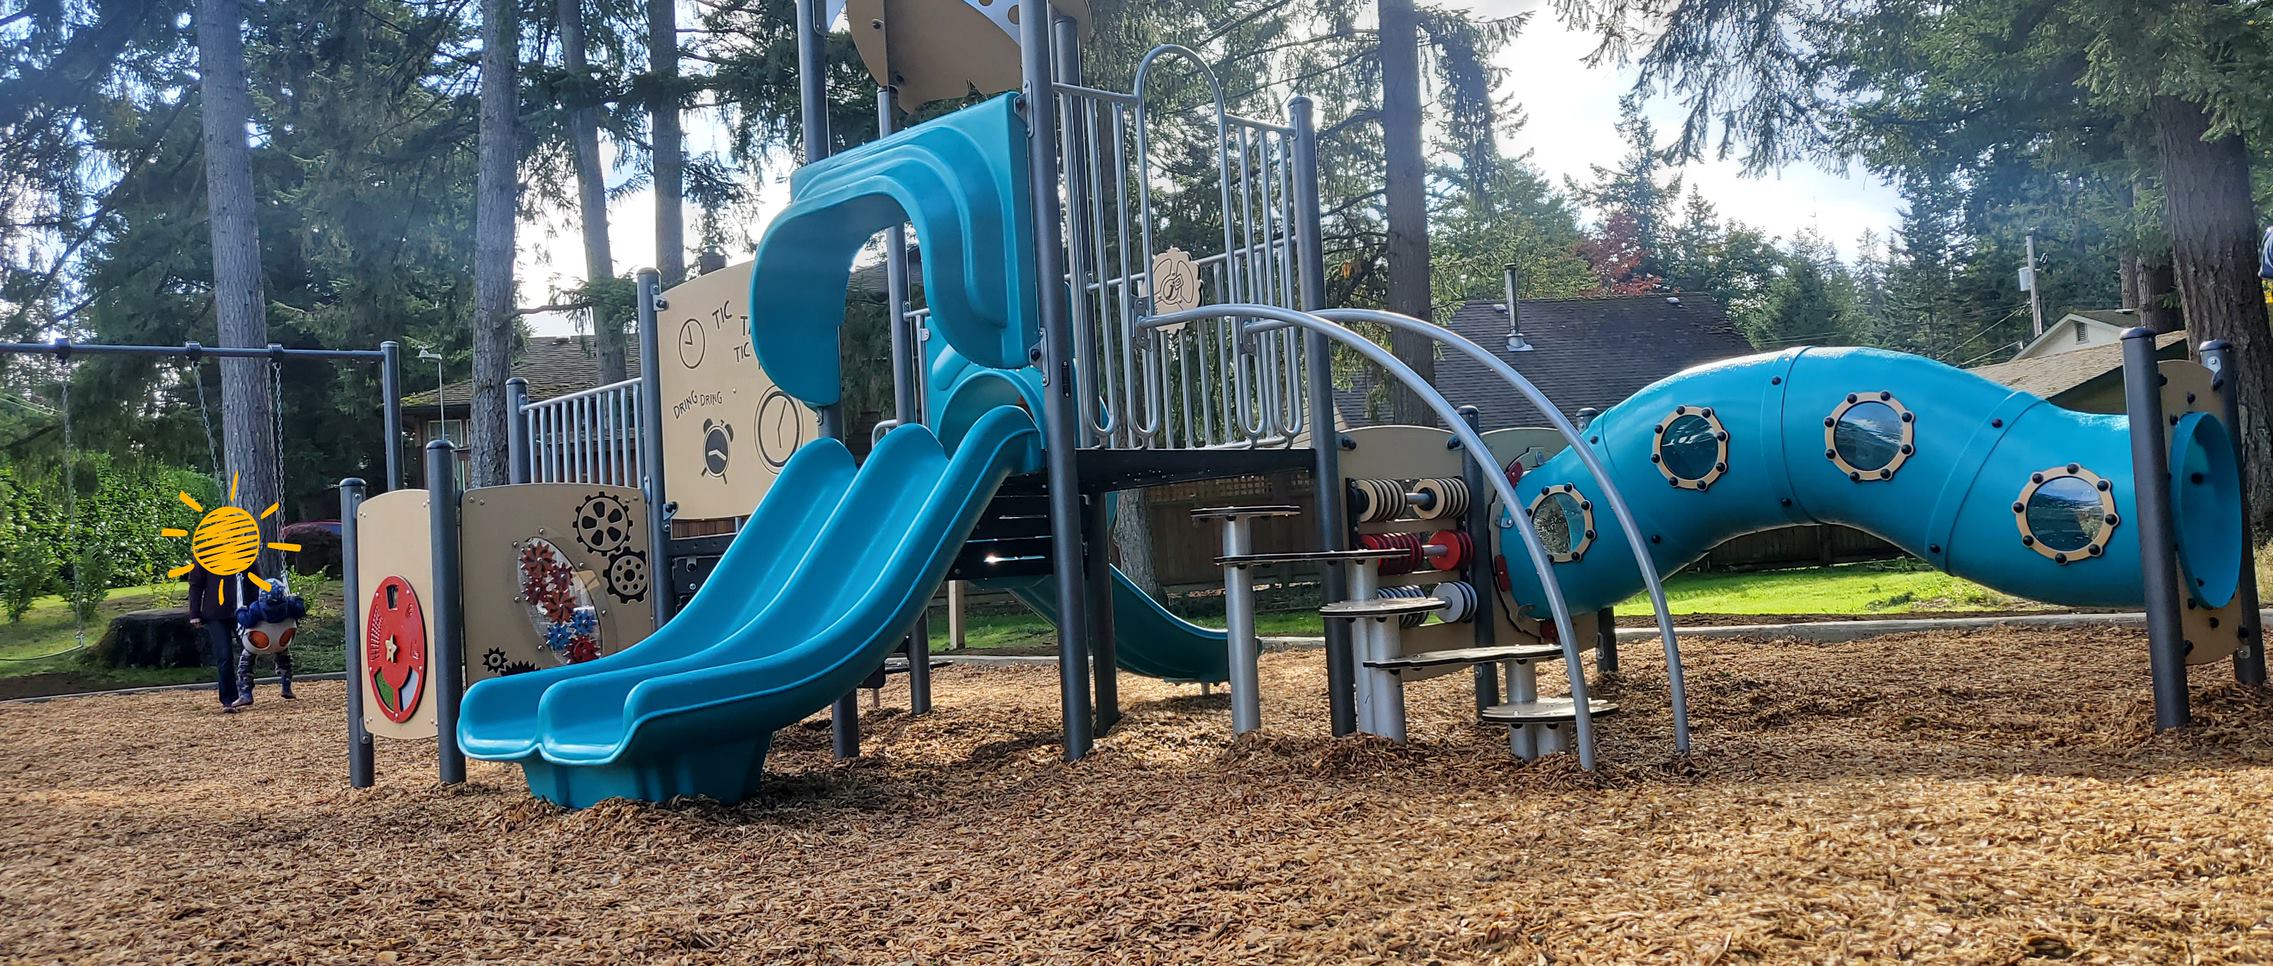 Playing it Safe: Common Fears When Choosing a Children’s Playground Provider